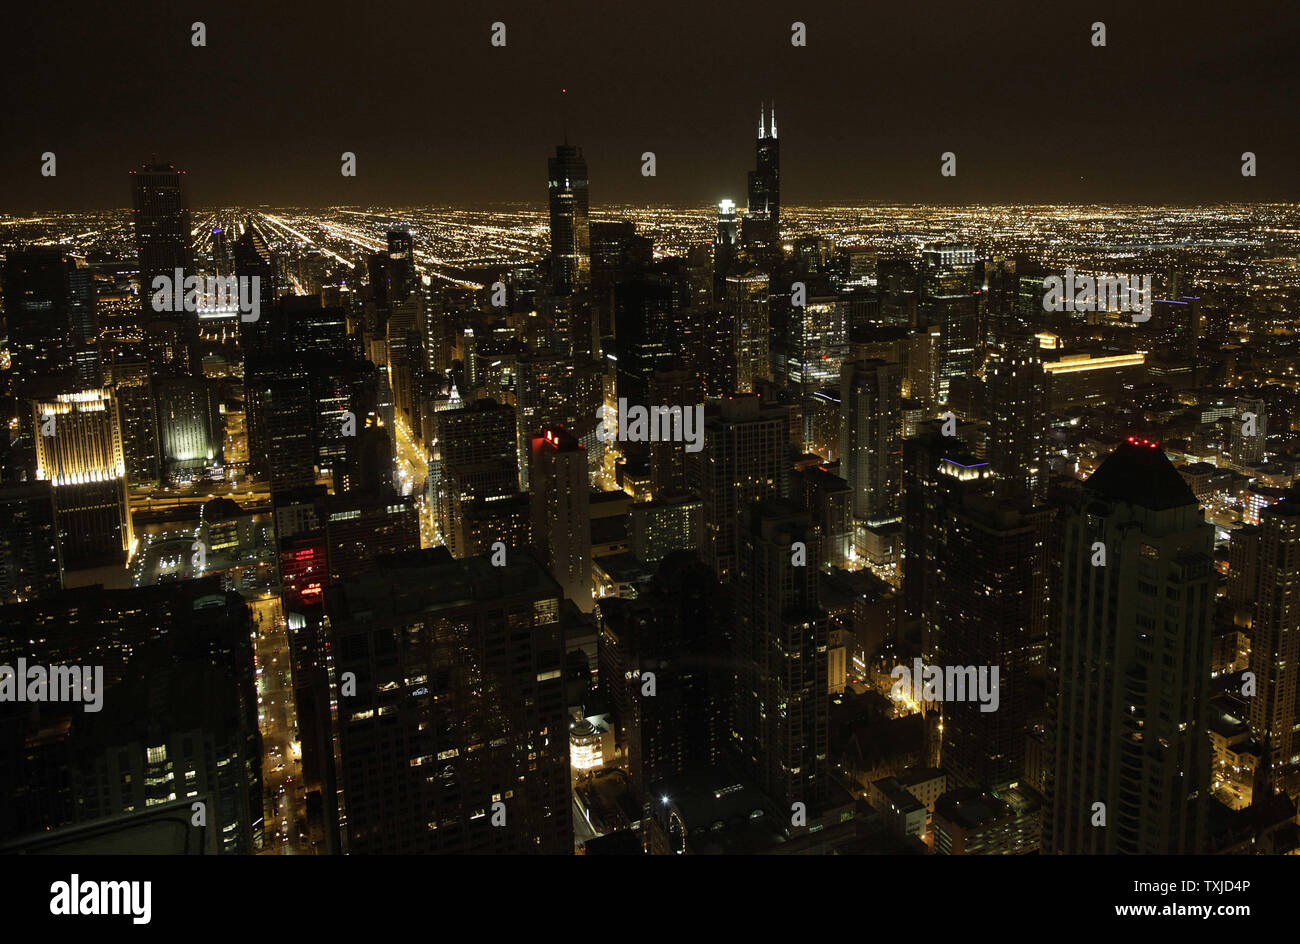 The Chicago skyline is seen from the John Hancock Center 94th floor observatory prior to the start of Earth Hour in Chicago on March 27, 2010. Chicago residents and businesses joined an estimated one billion people in 121 countries who are expected to take part in Earth Hour, a time set aside on Saturday to turn off unnecessary lights for one hour to raise awareness about energy conservation.     UPI/Brian Kersey Stock Photo